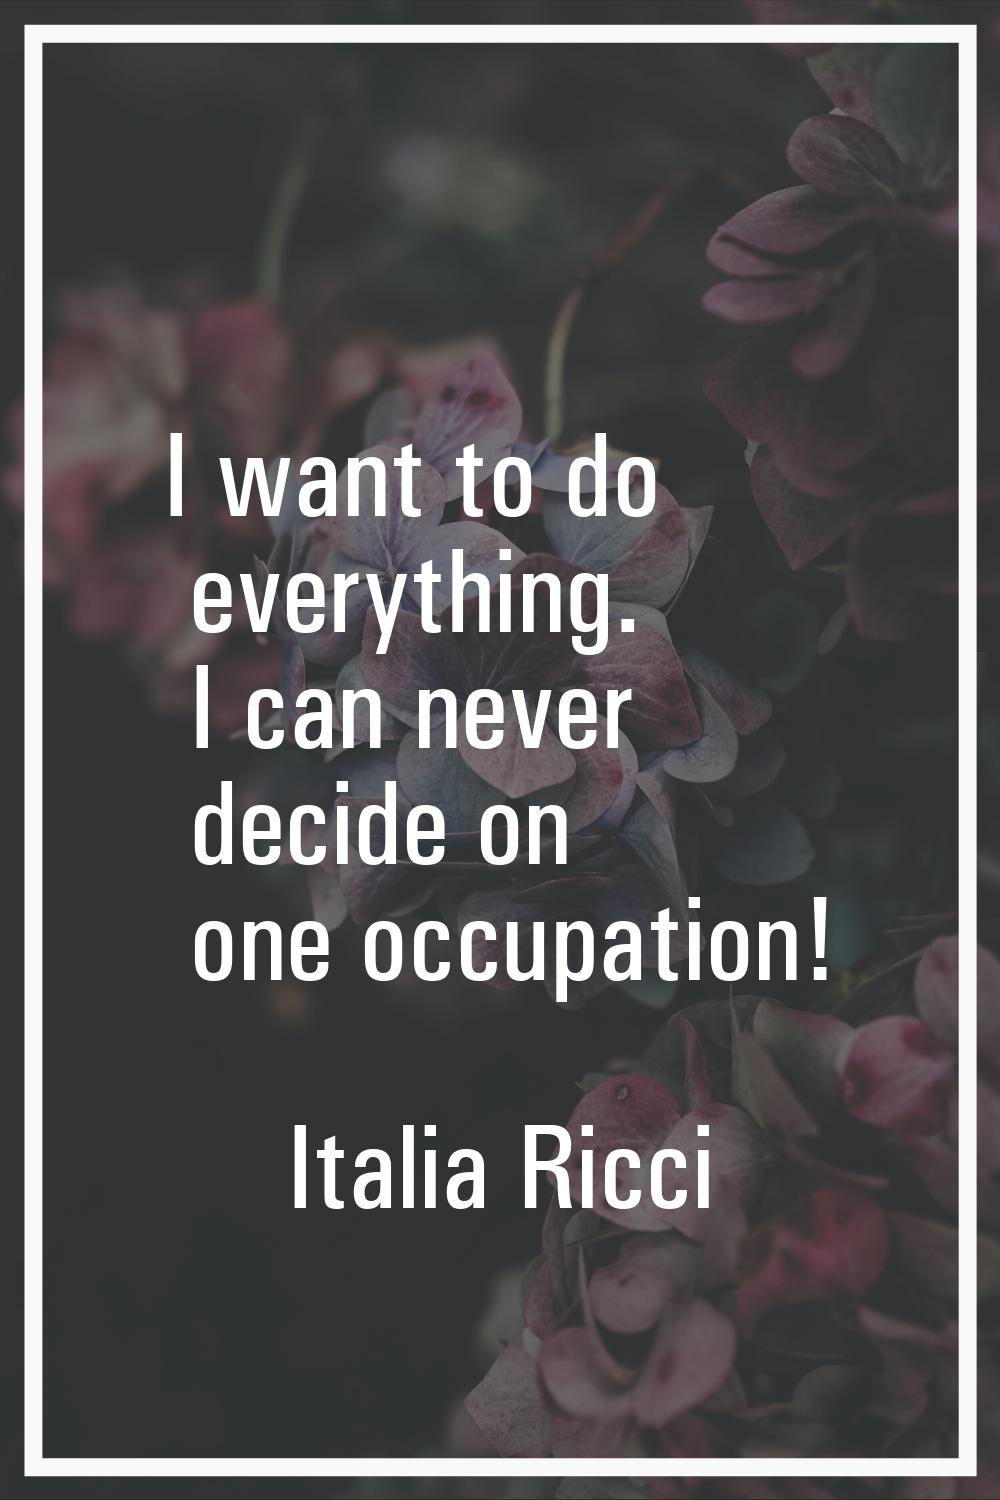 I want to do everything. I can never decide on one occupation!